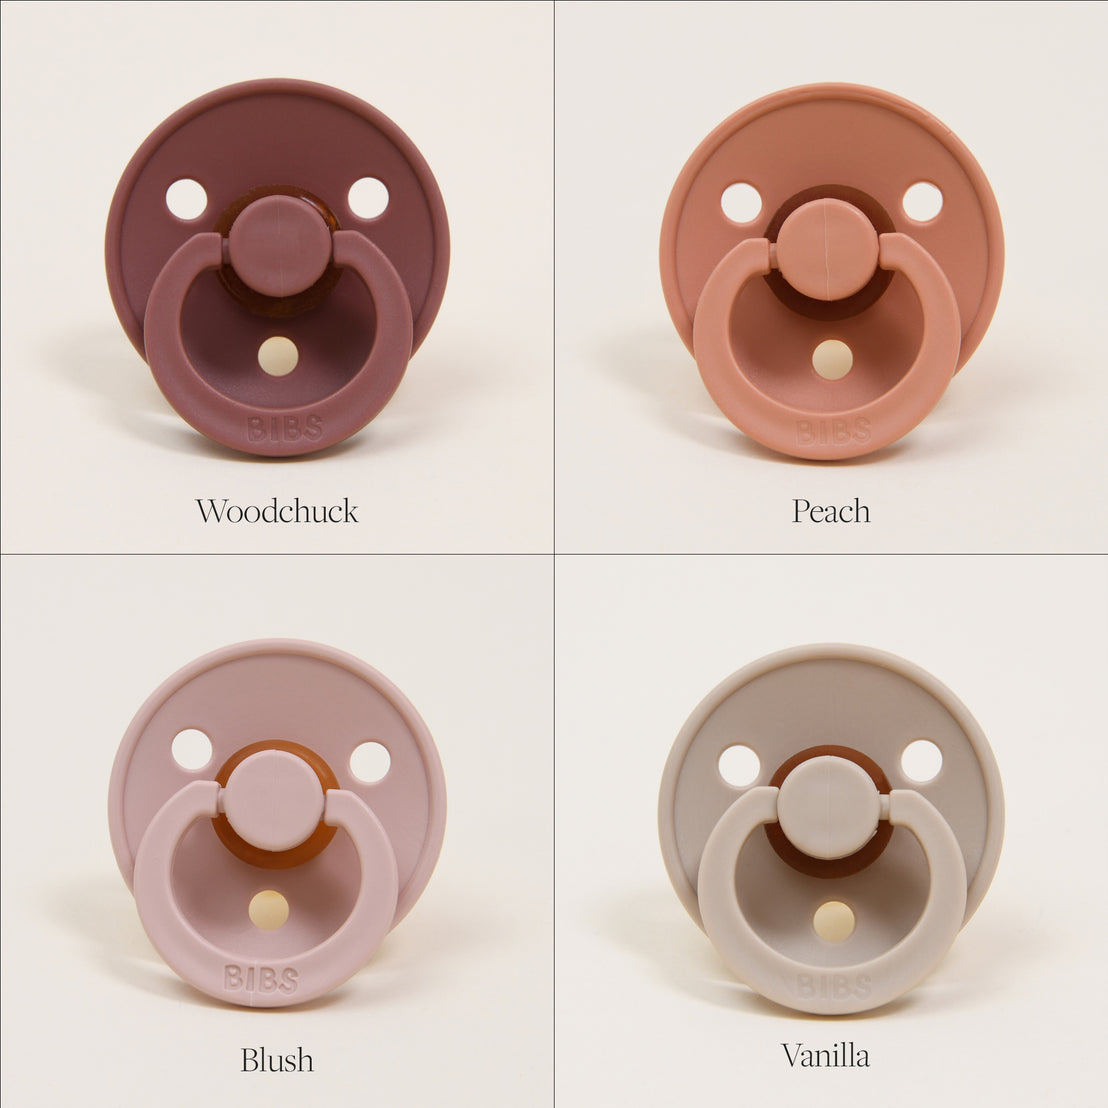 Four Bibs Pacifiers in colors labeled woodchuck, peach, blush, and vanilla against a cream background, arranged in a grid. Each pacifier has a round shield.